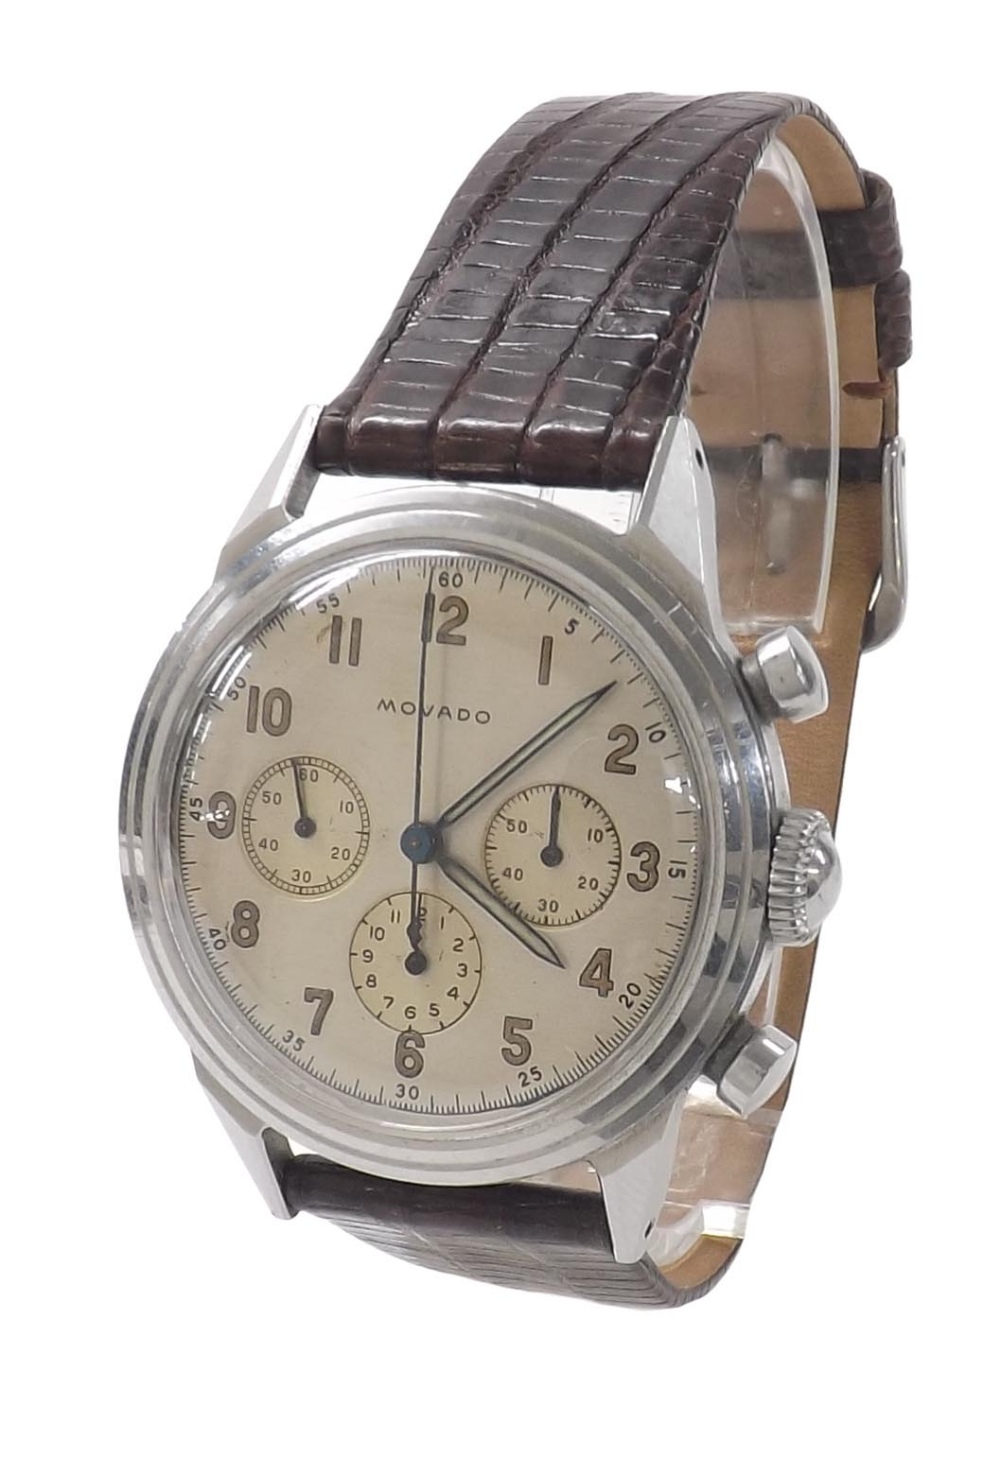 Movado chronograph stainless steel gentleman's wristwatch, ref. 19038, circa 1950s, signed - Image 2 of 4